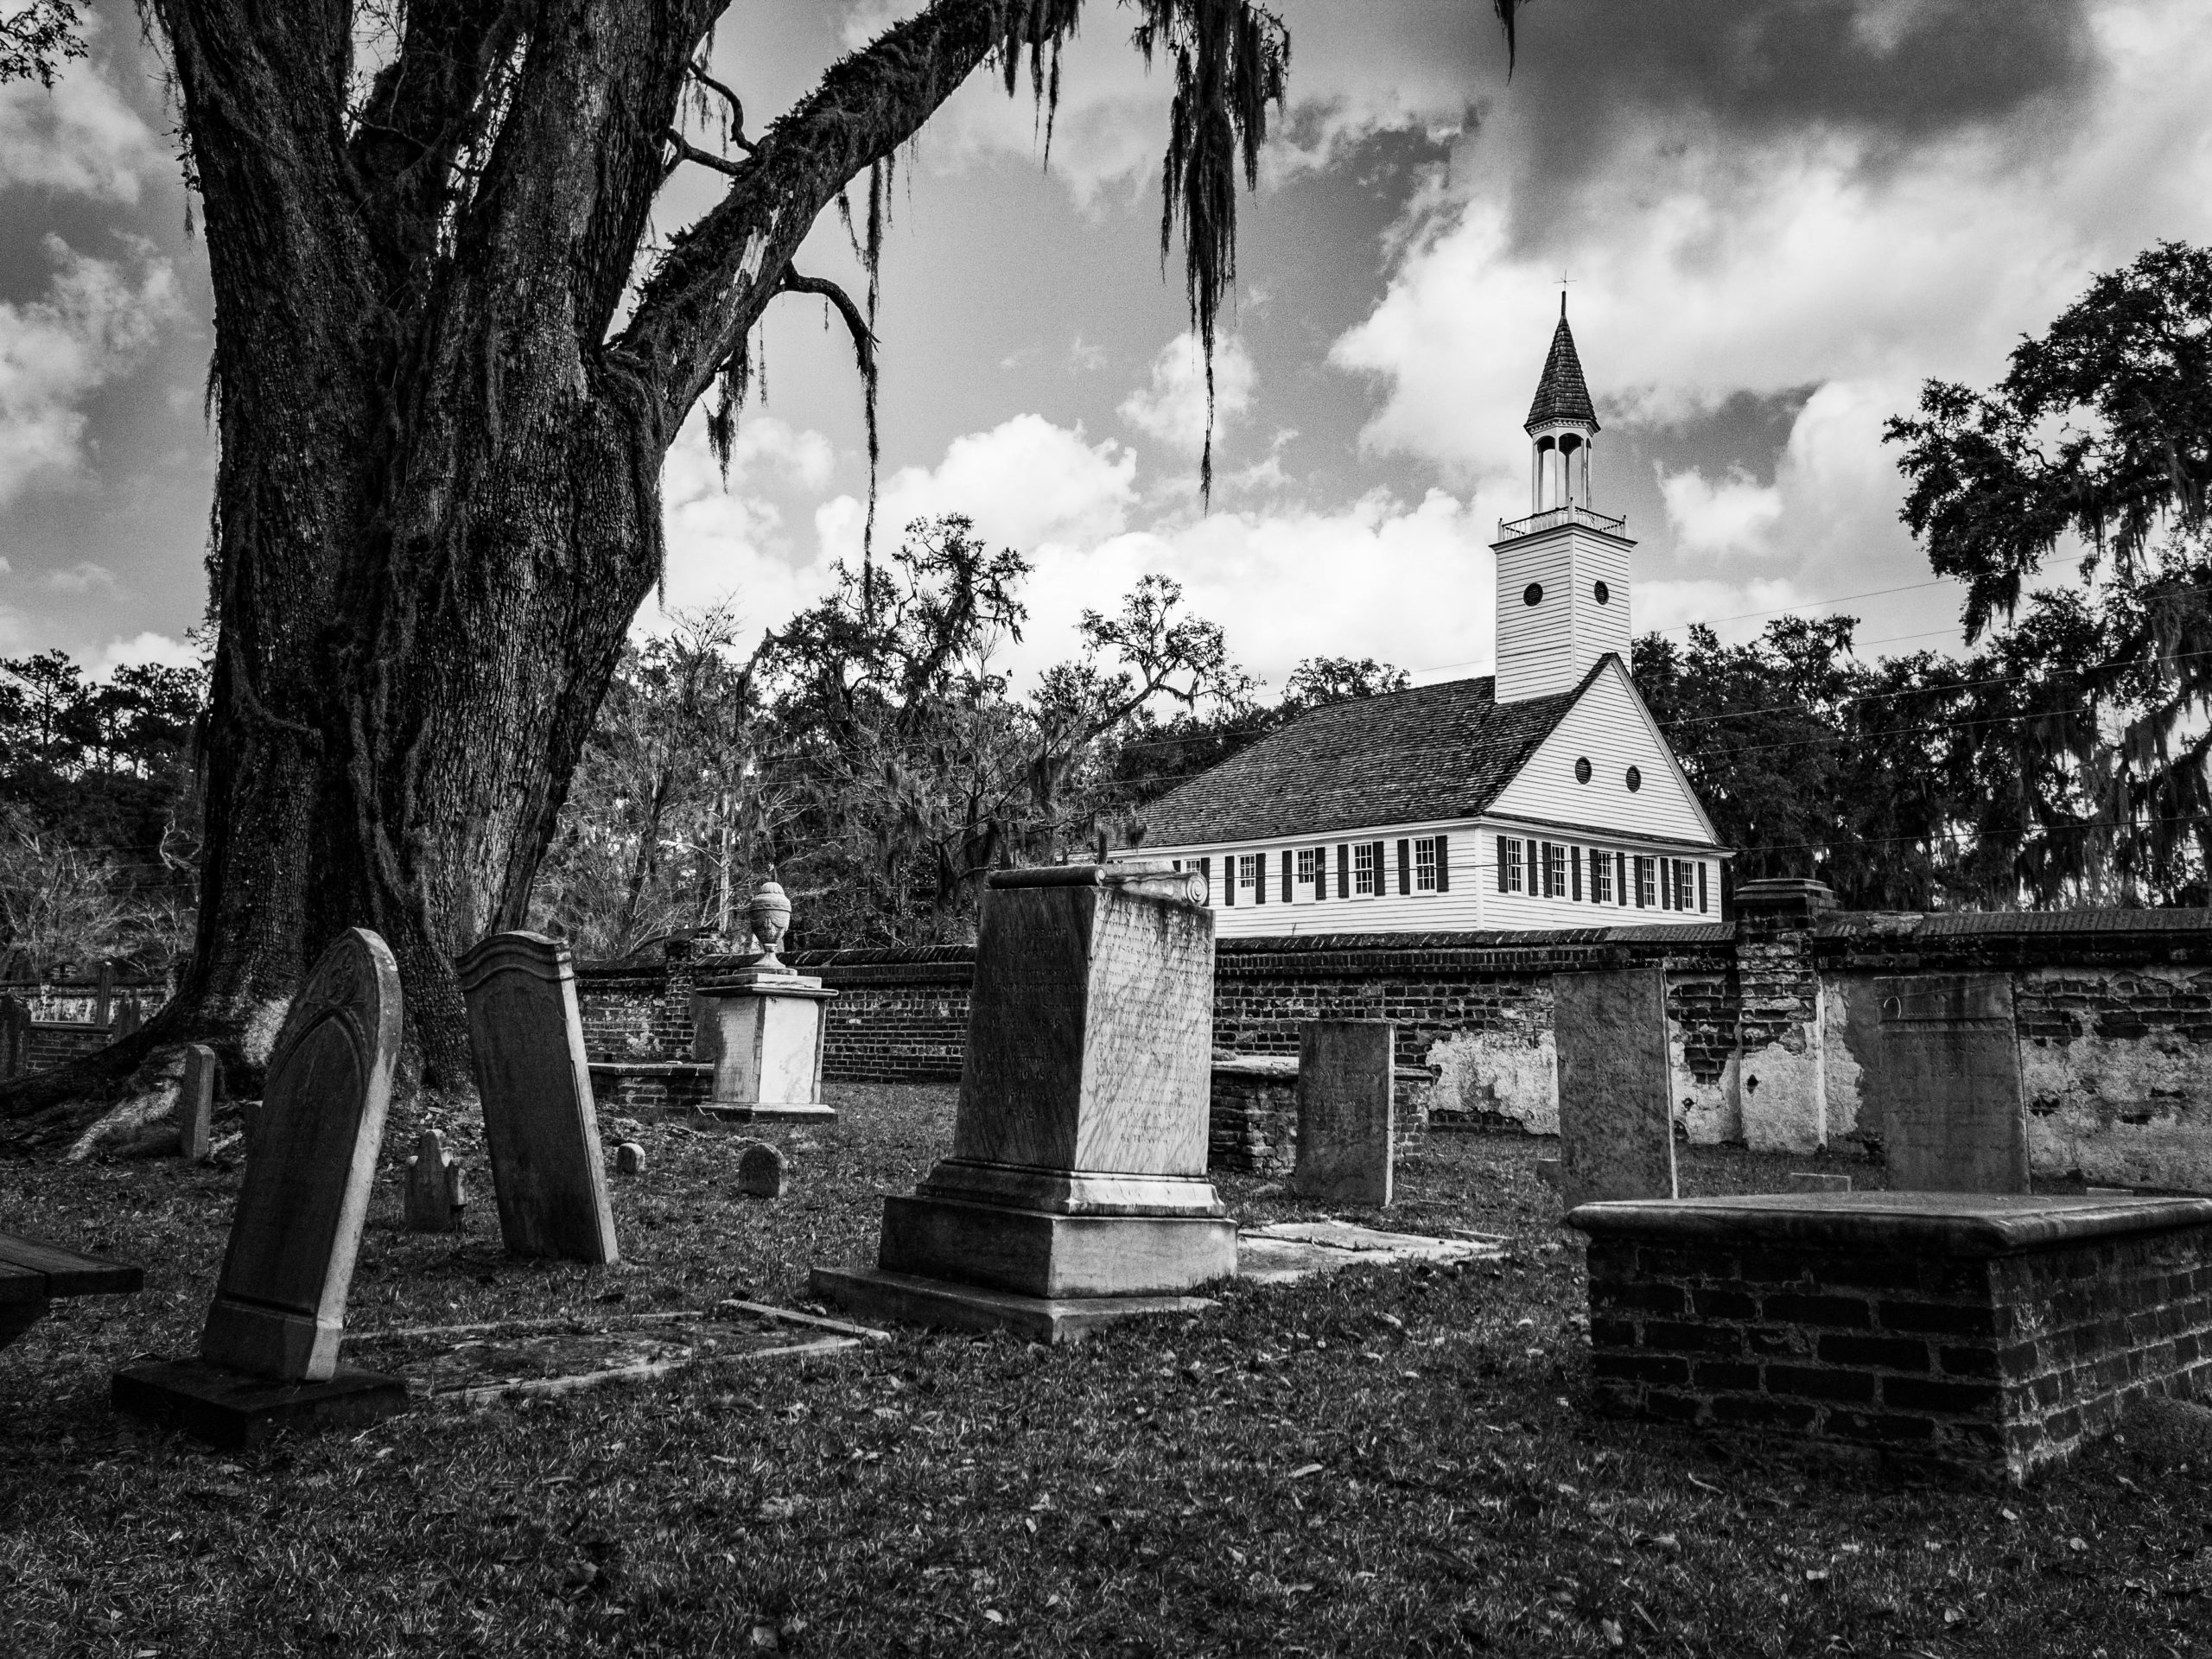 MIDWAY CEMETERY: HIDDEN AND HAUNTED